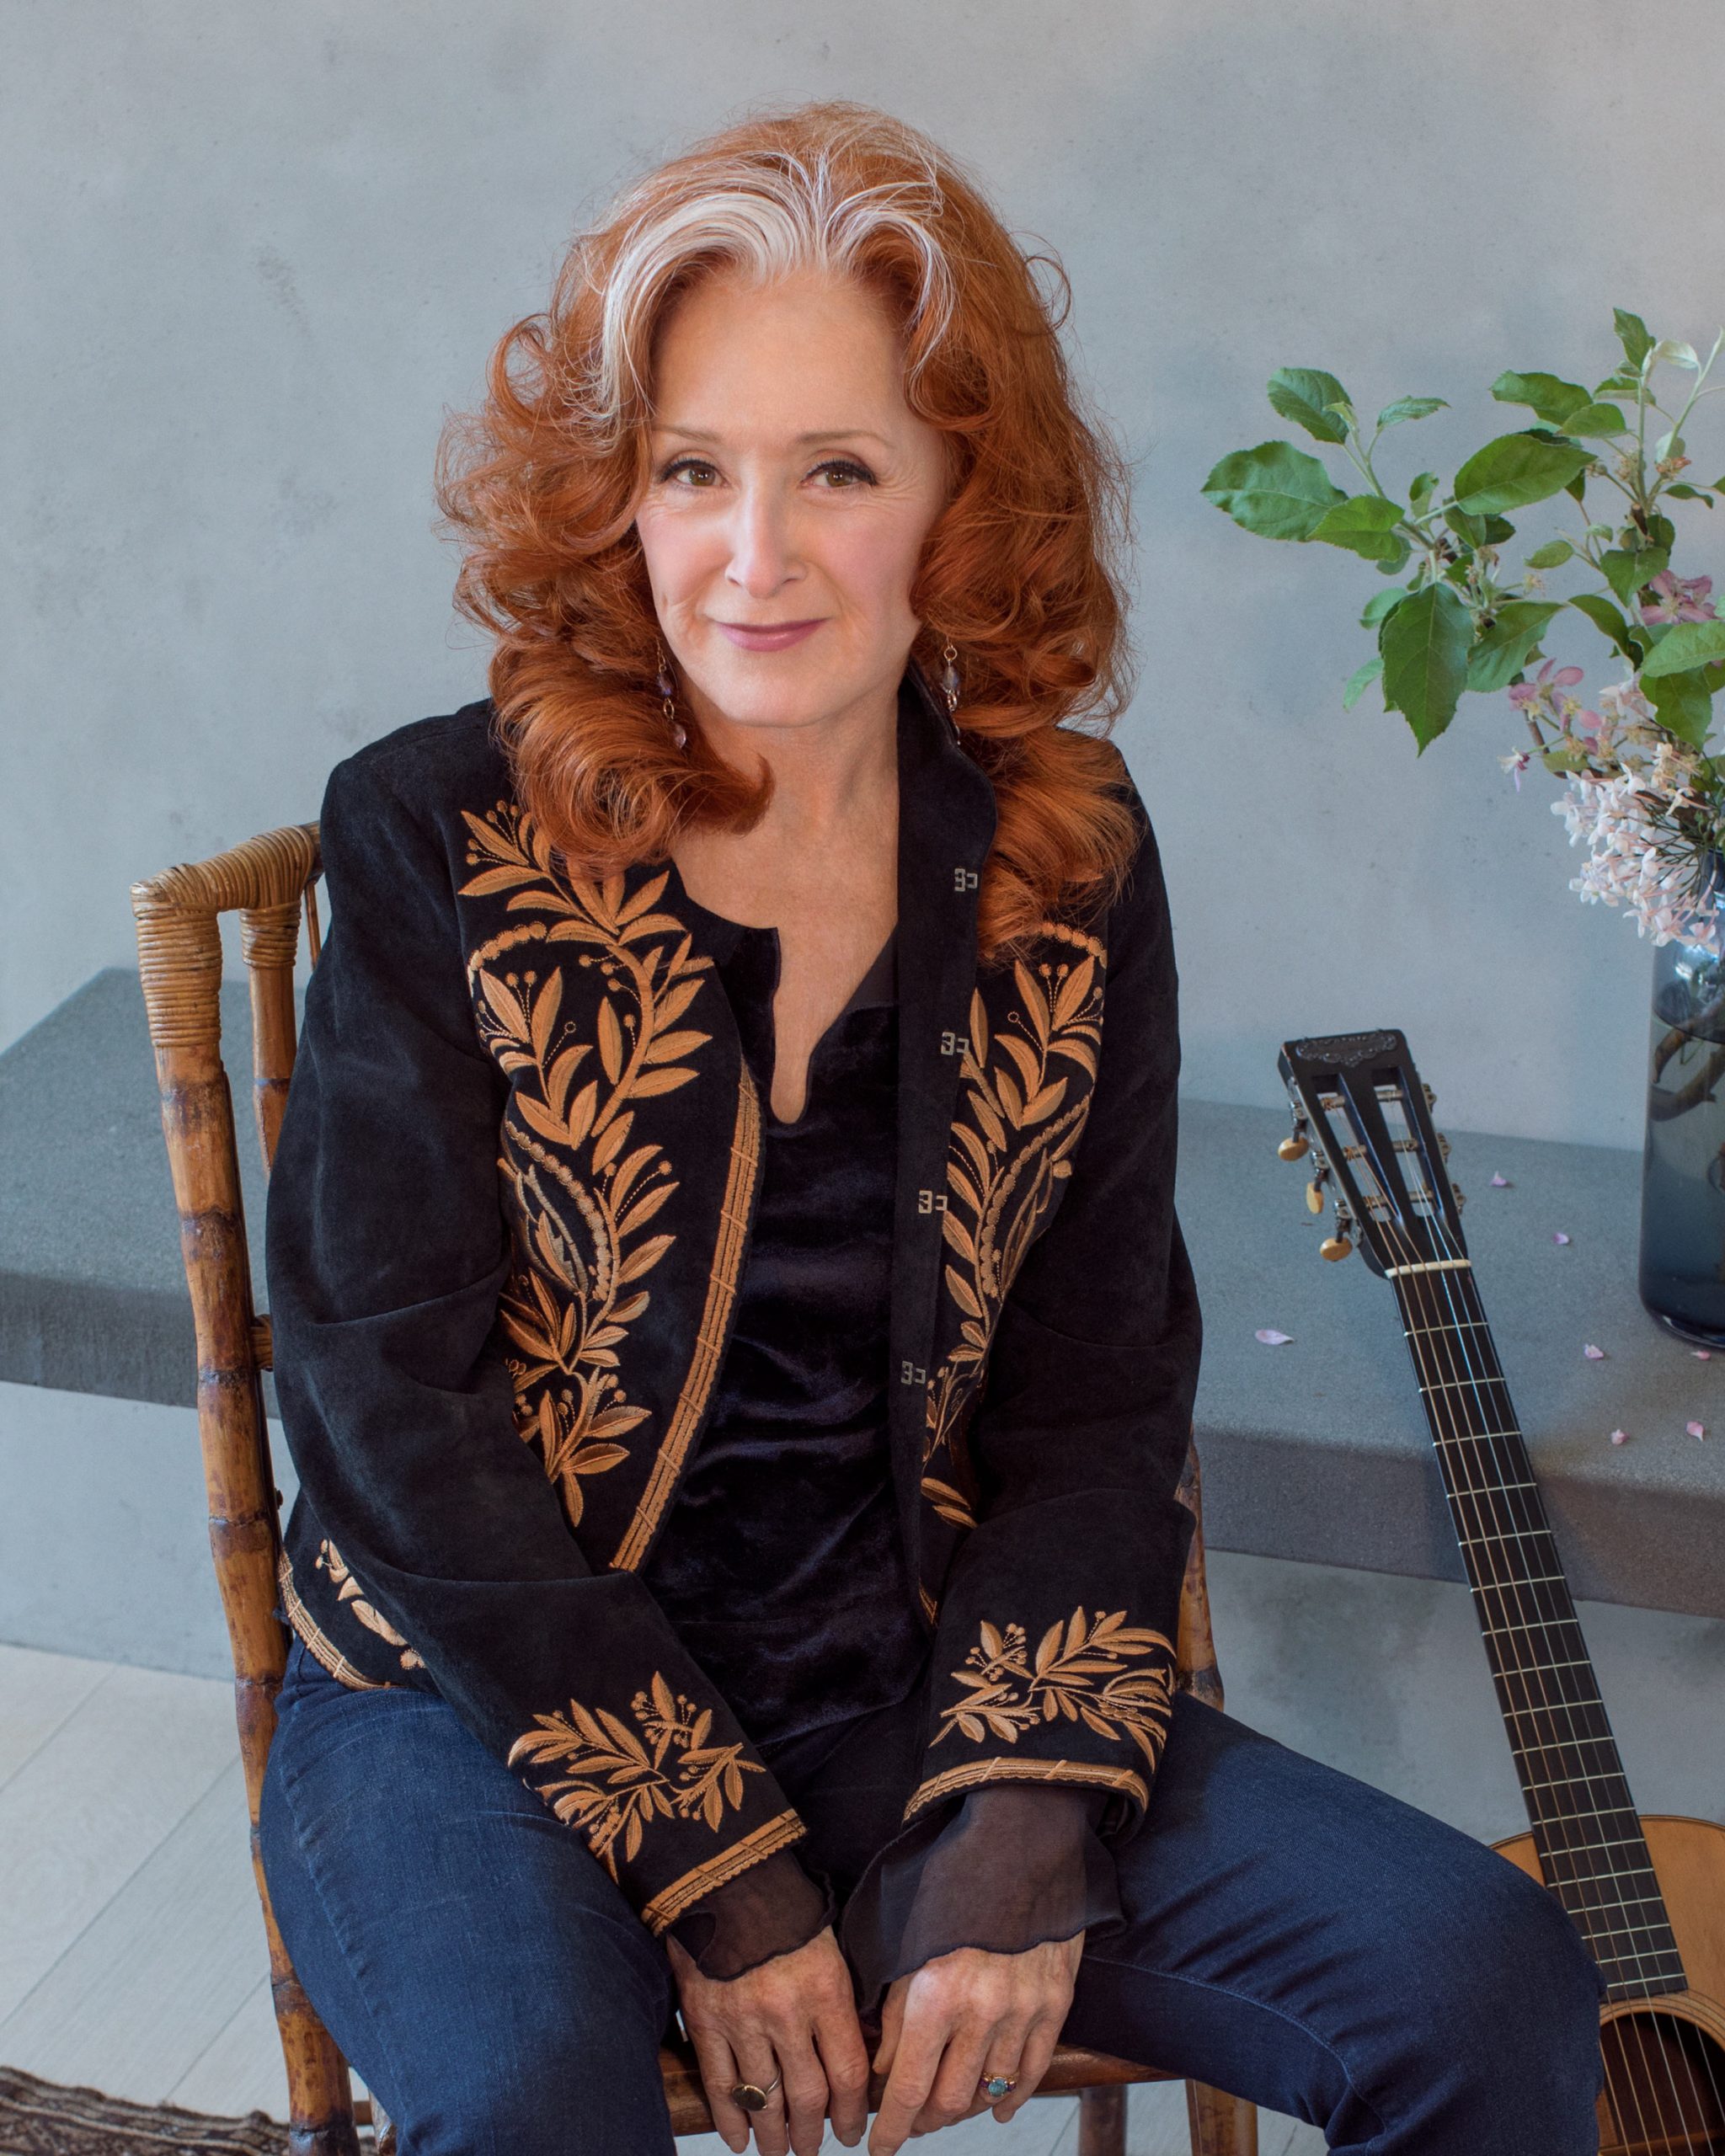 Bonnie Raitt Hits The Road In 2022 With ‘Just Like That…’ Tour the